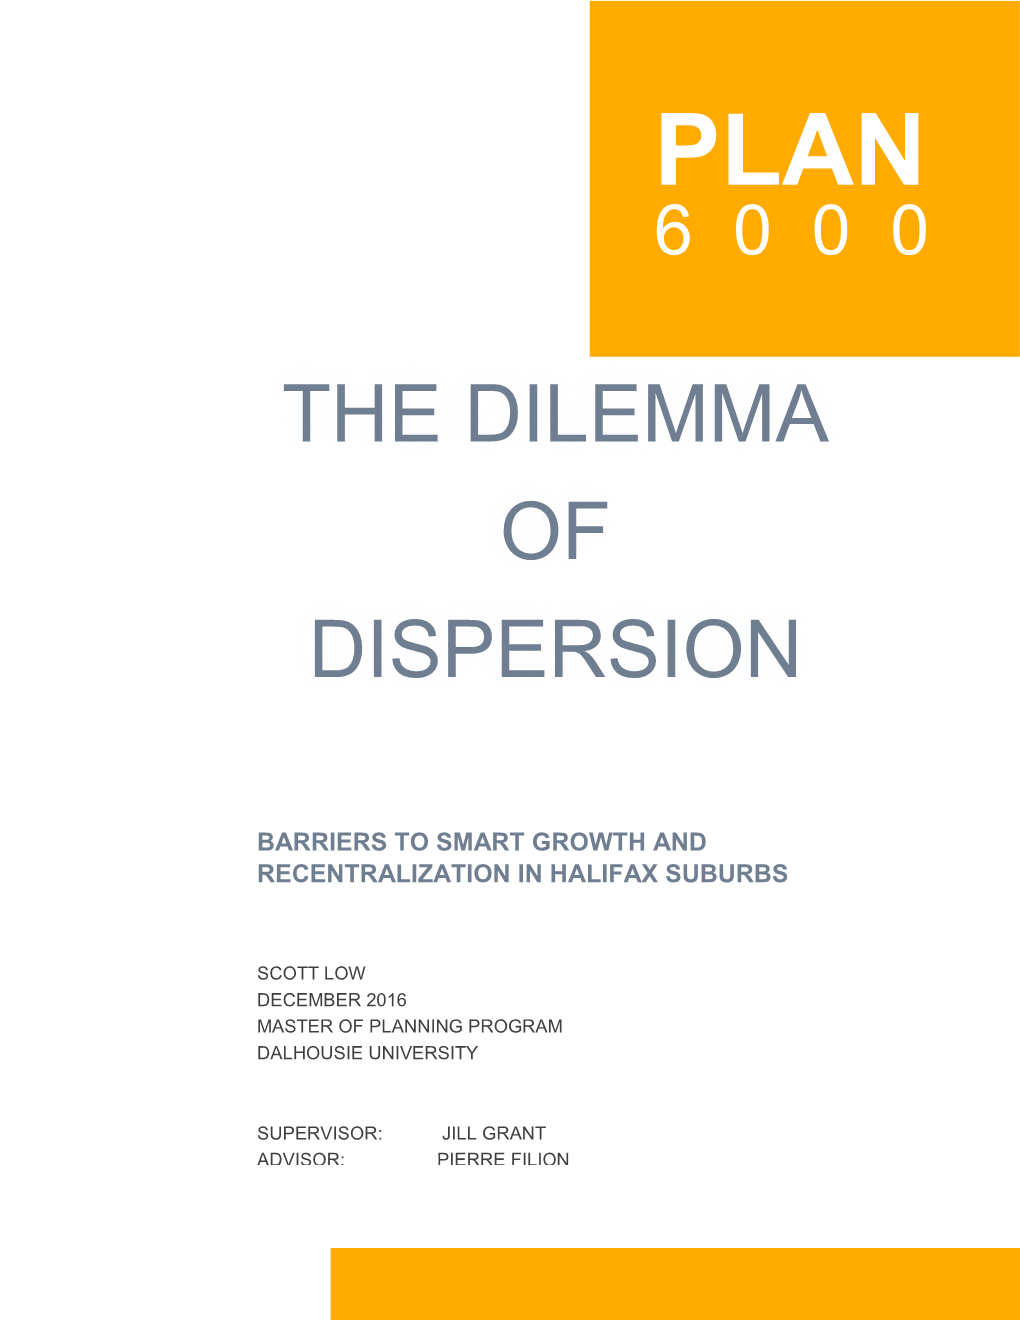 The Dilemma of Dispersion